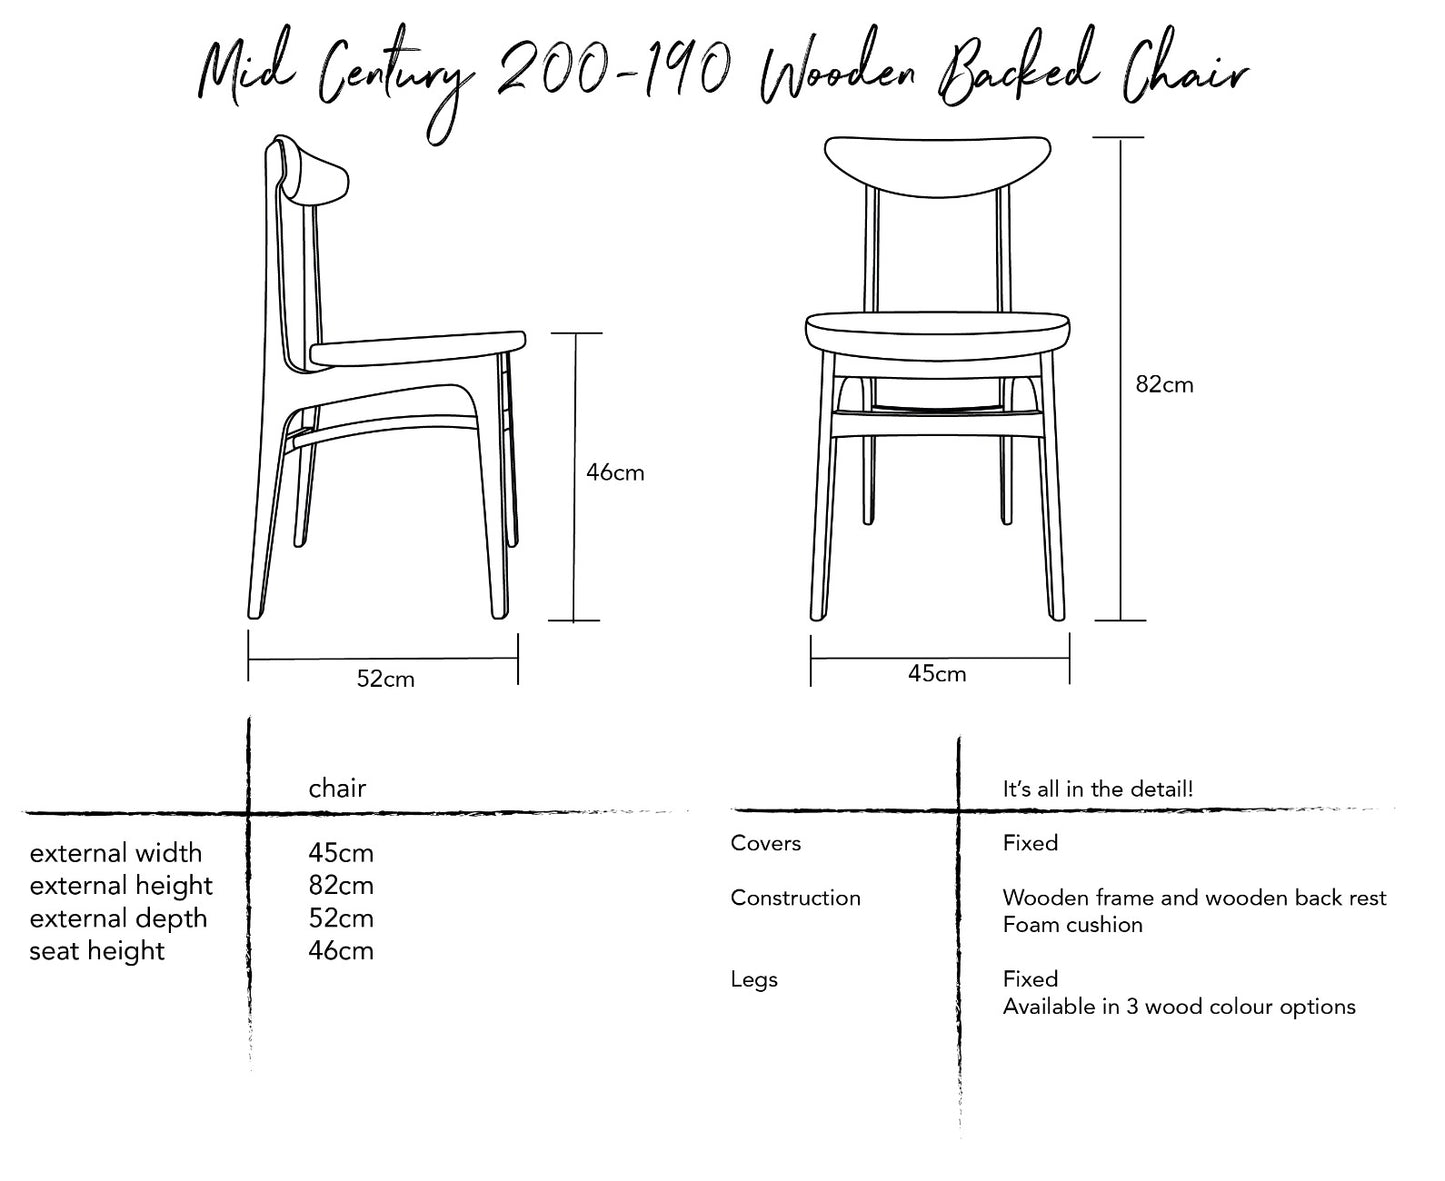 Mid-Century 200-190 Wooden Backed Dining Chair